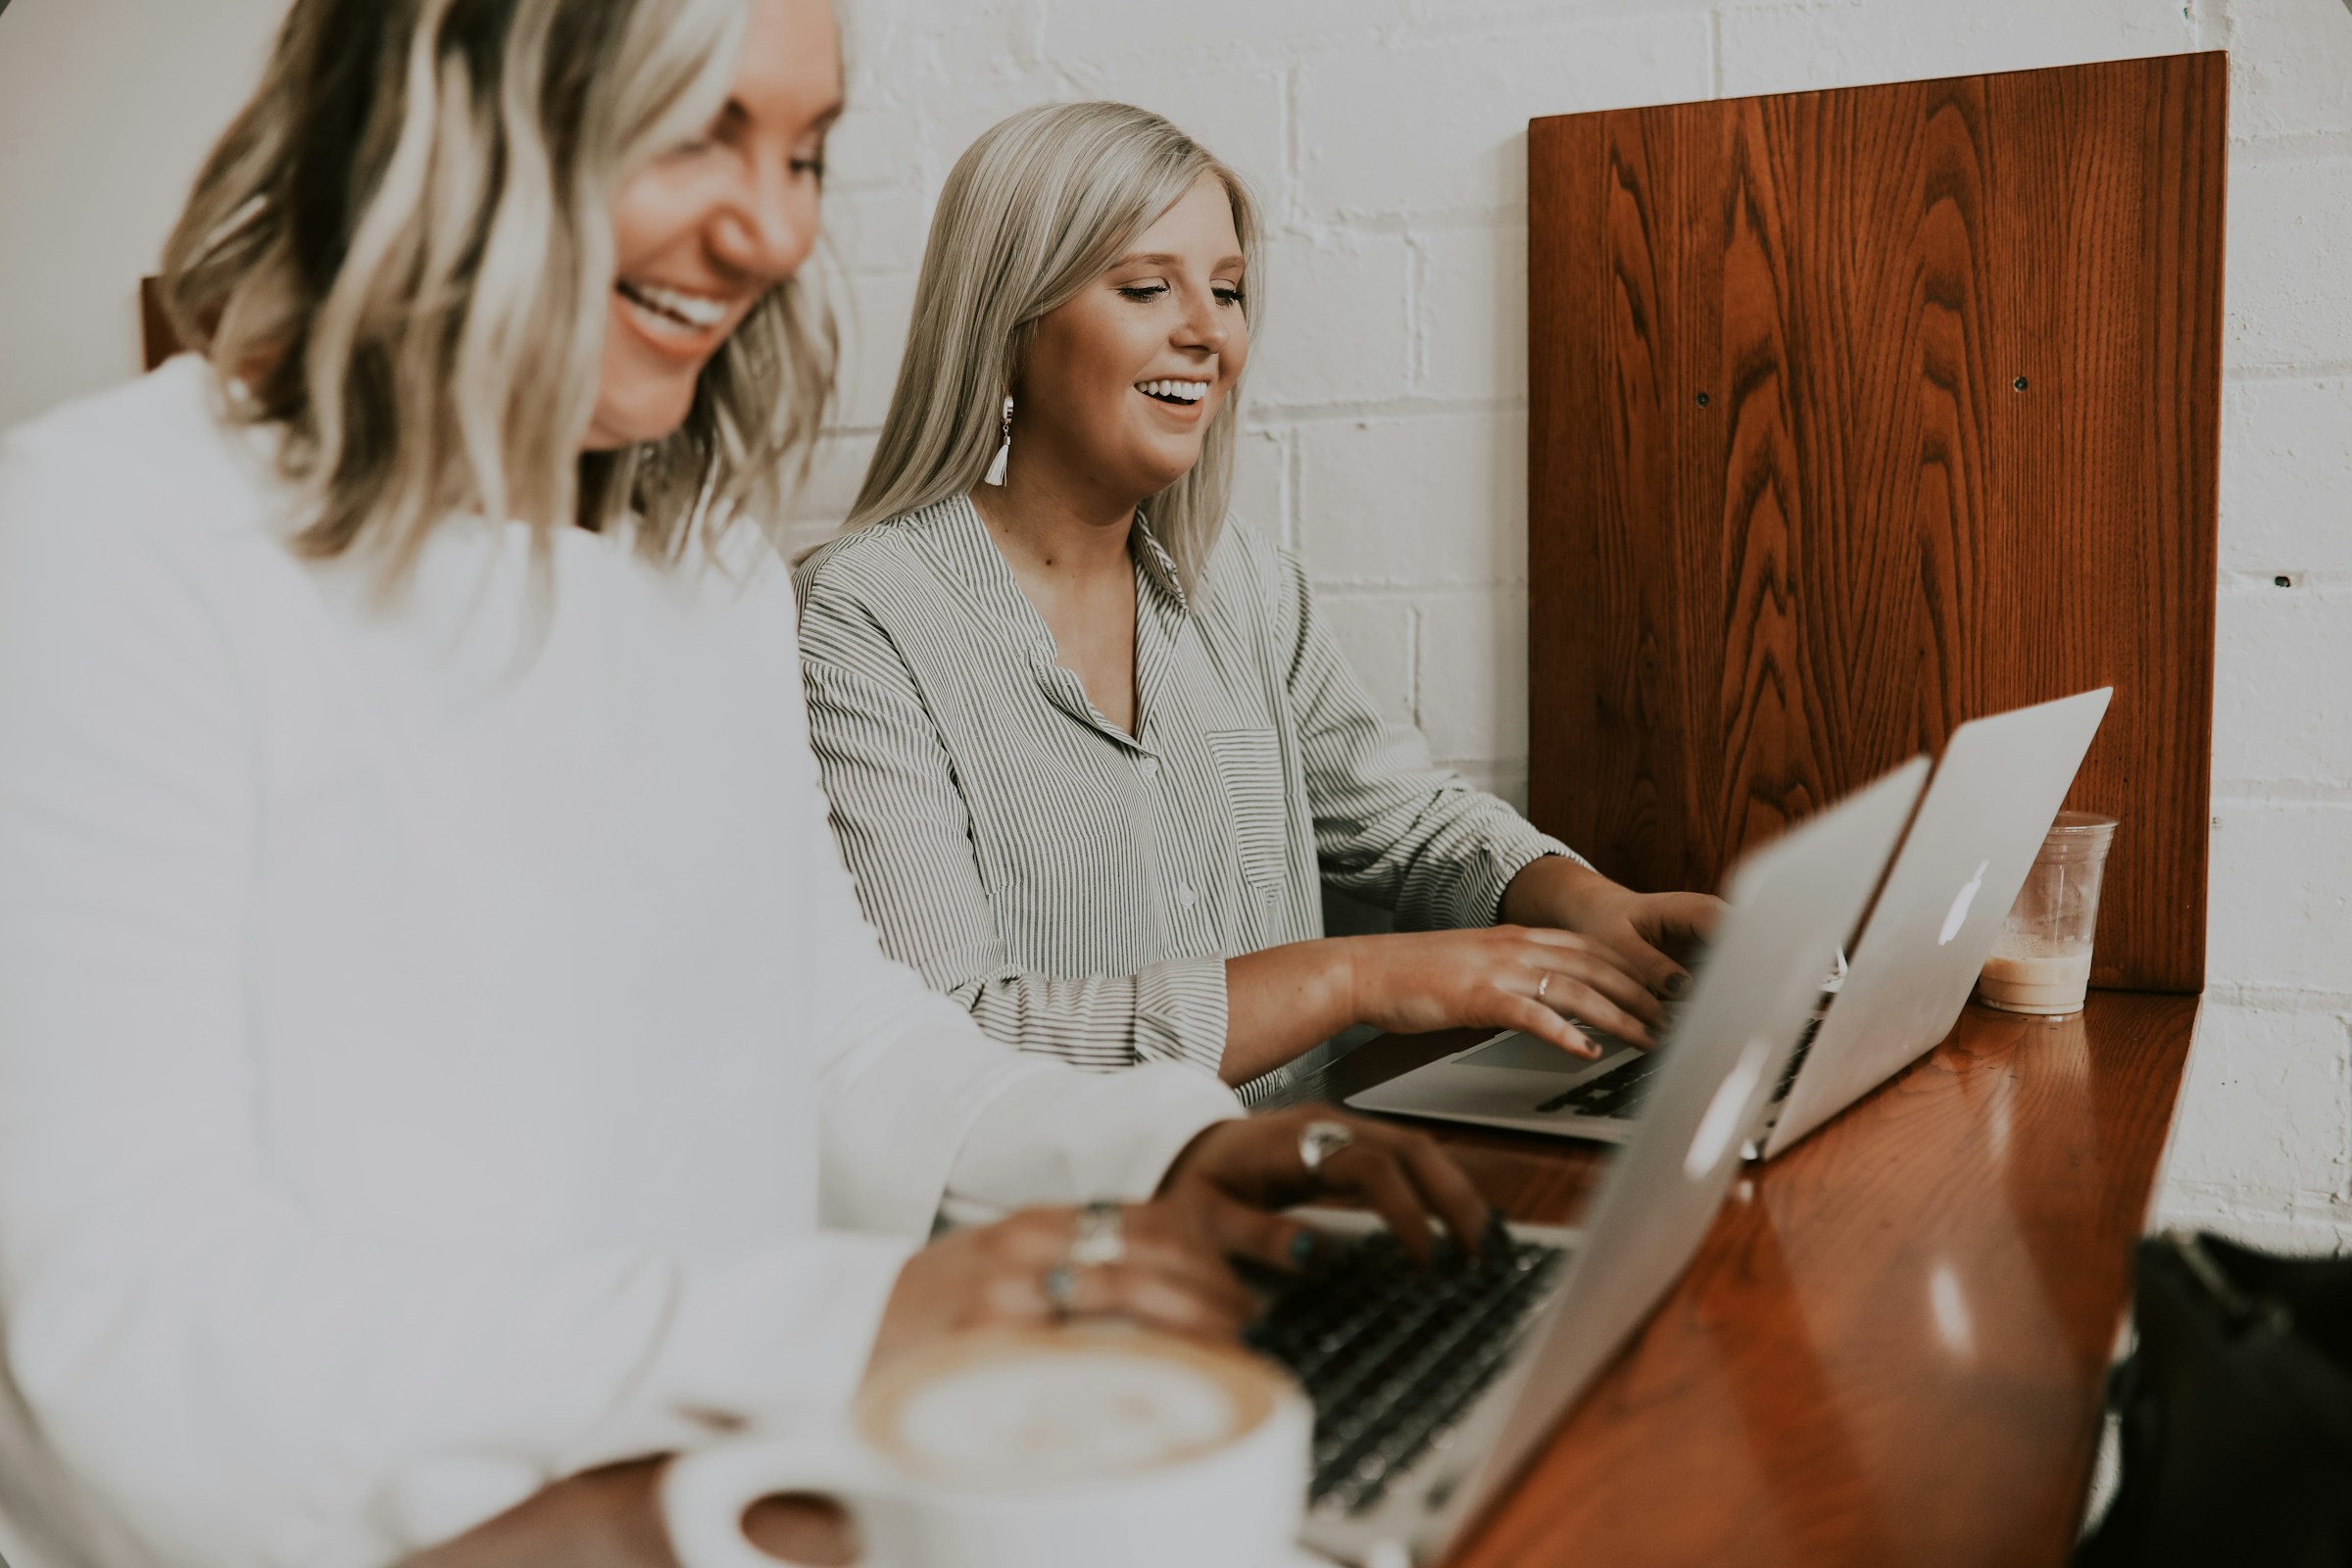 Two women sitting together with laptops | Source: Unsplash